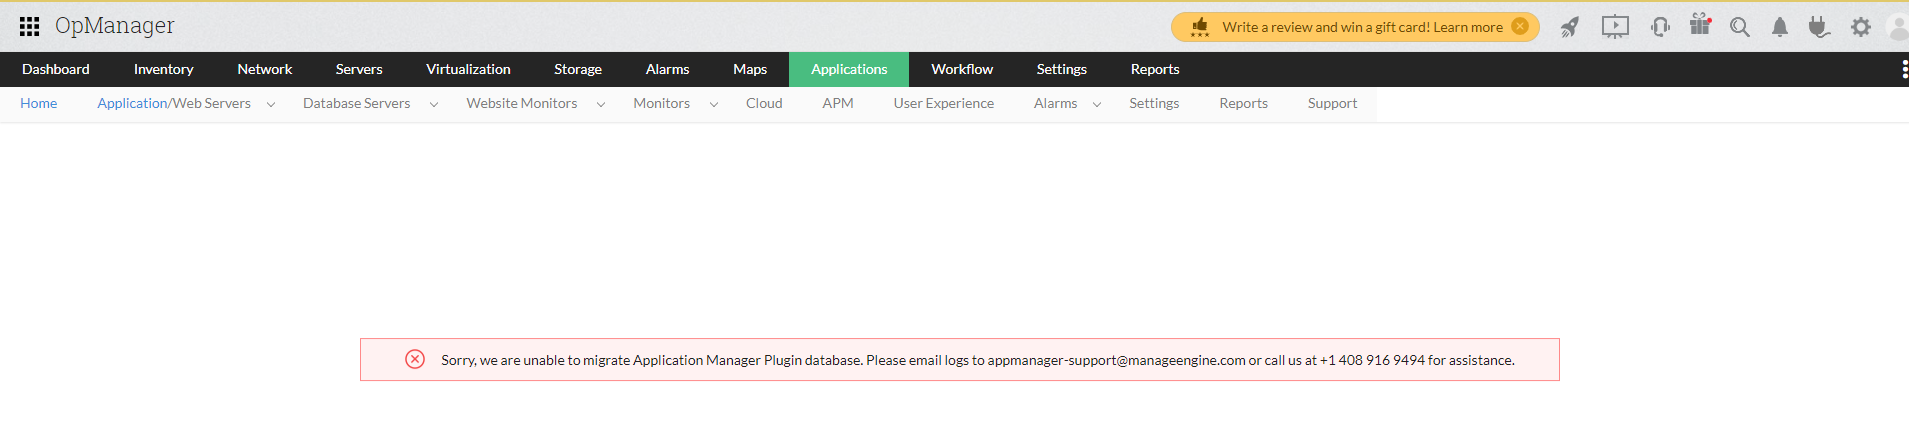 Sorry, we are unable to migrate Applications Manager Plugin database